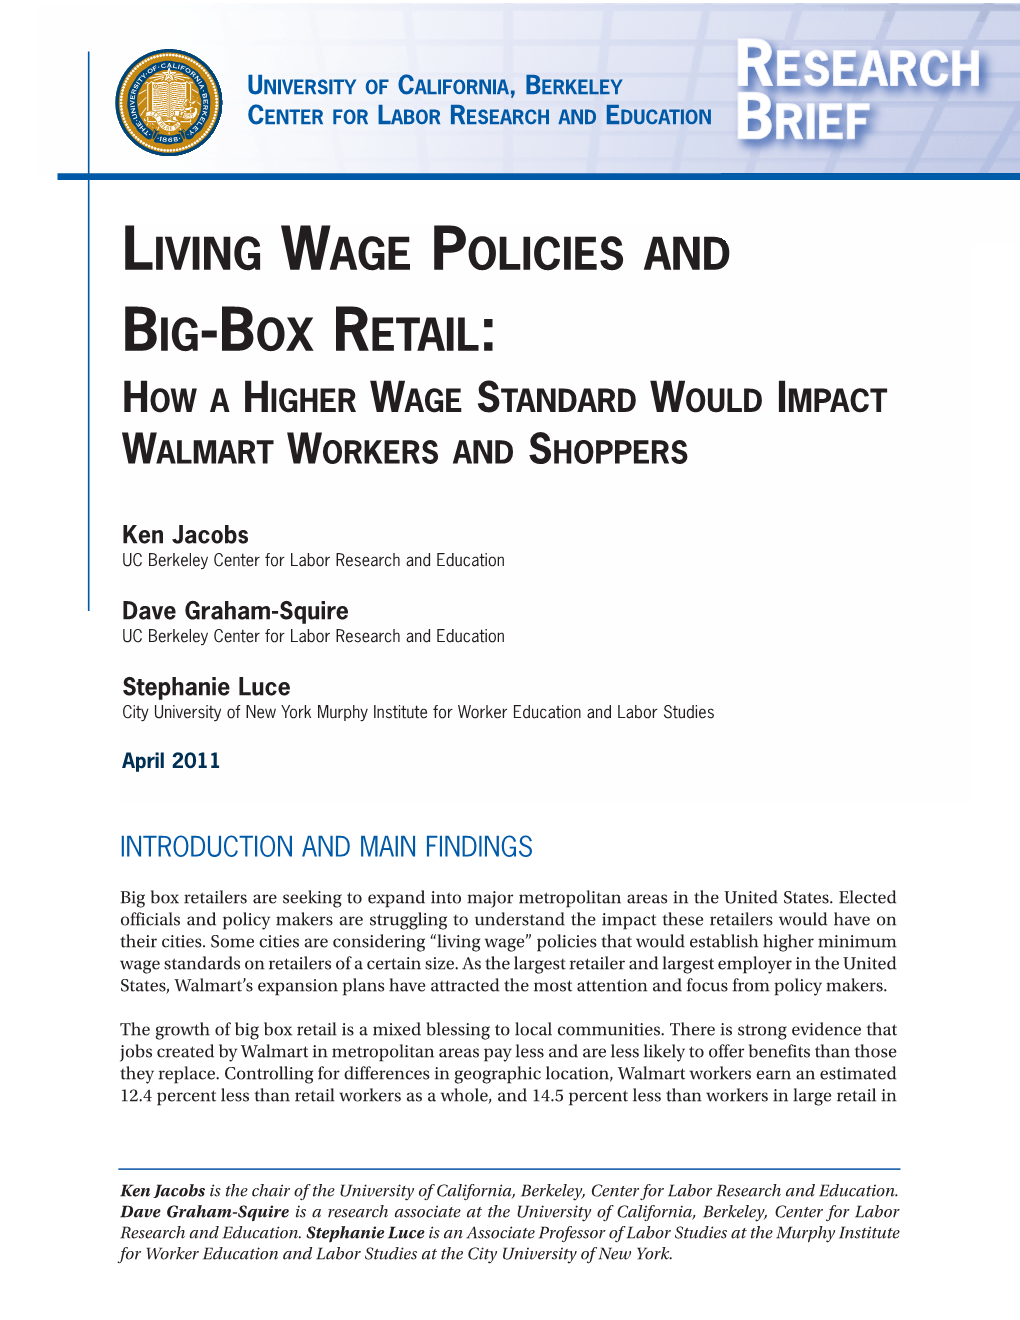 Living Wage Policies and Big-Box Retail: How a Higher Wage Standard Would Impact Walmart Workers and Shoppers